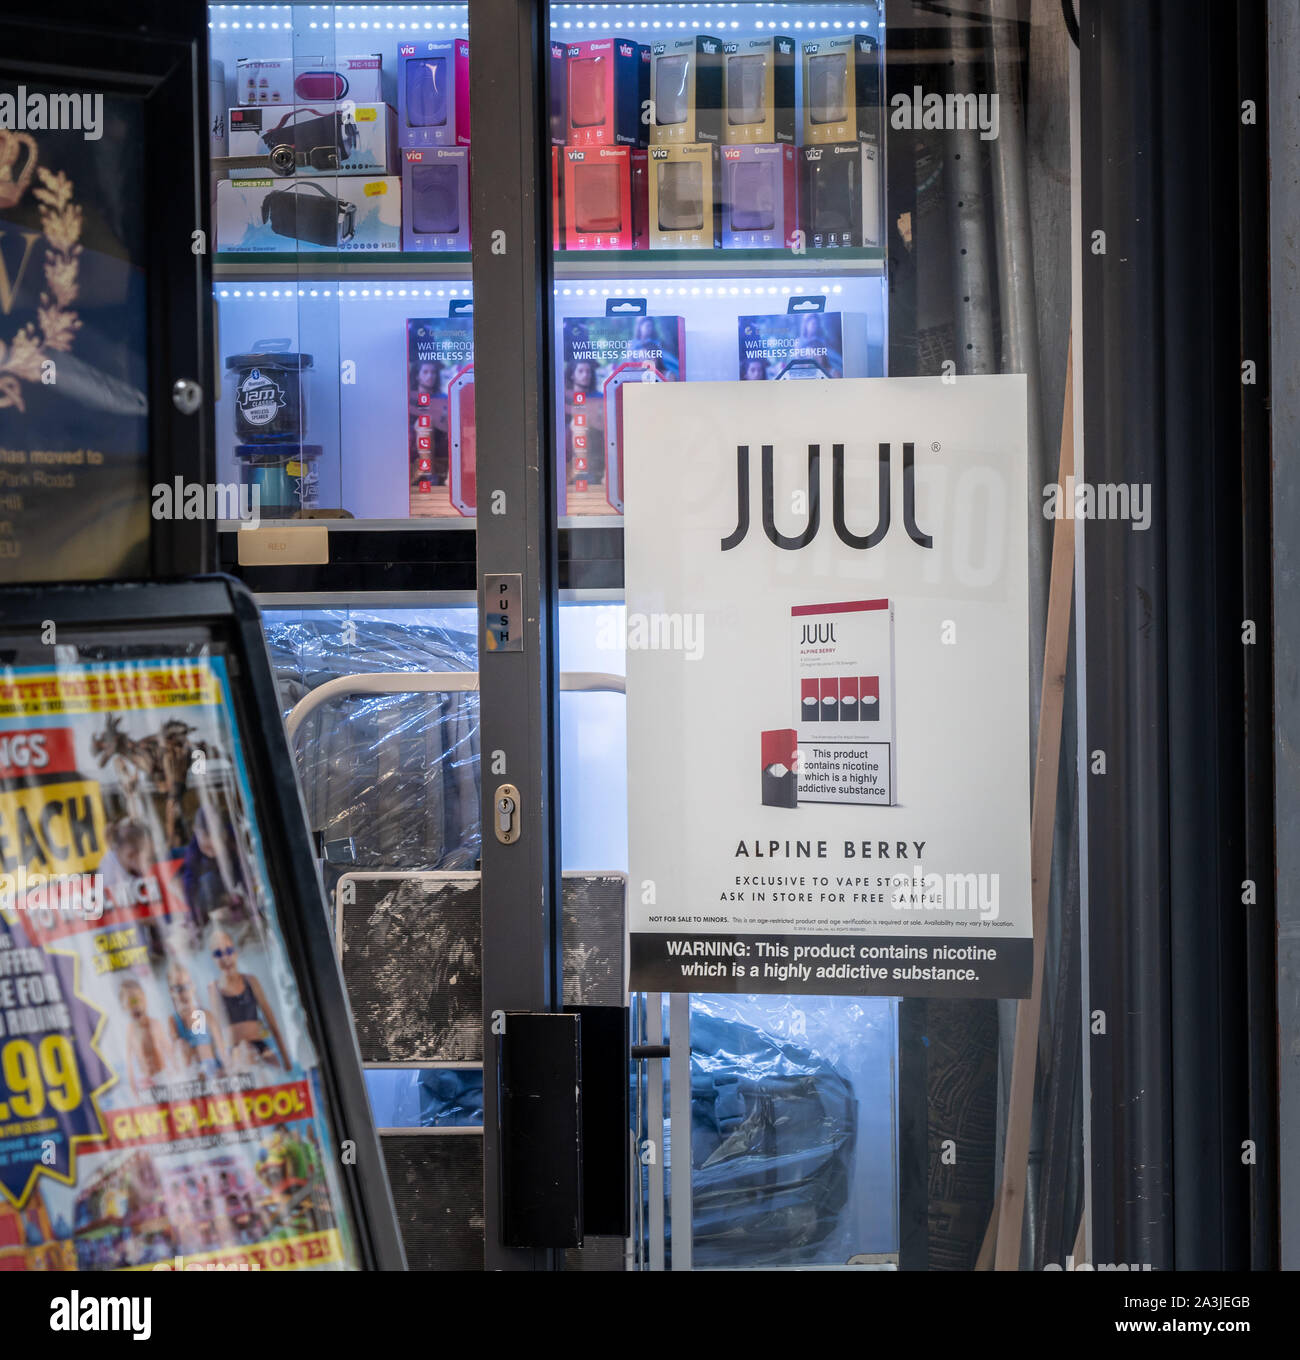 LONDON, UK - 4 October 2019: Large advert for Juul flavored nicotine on doorway to Vape store in London Stock Photo